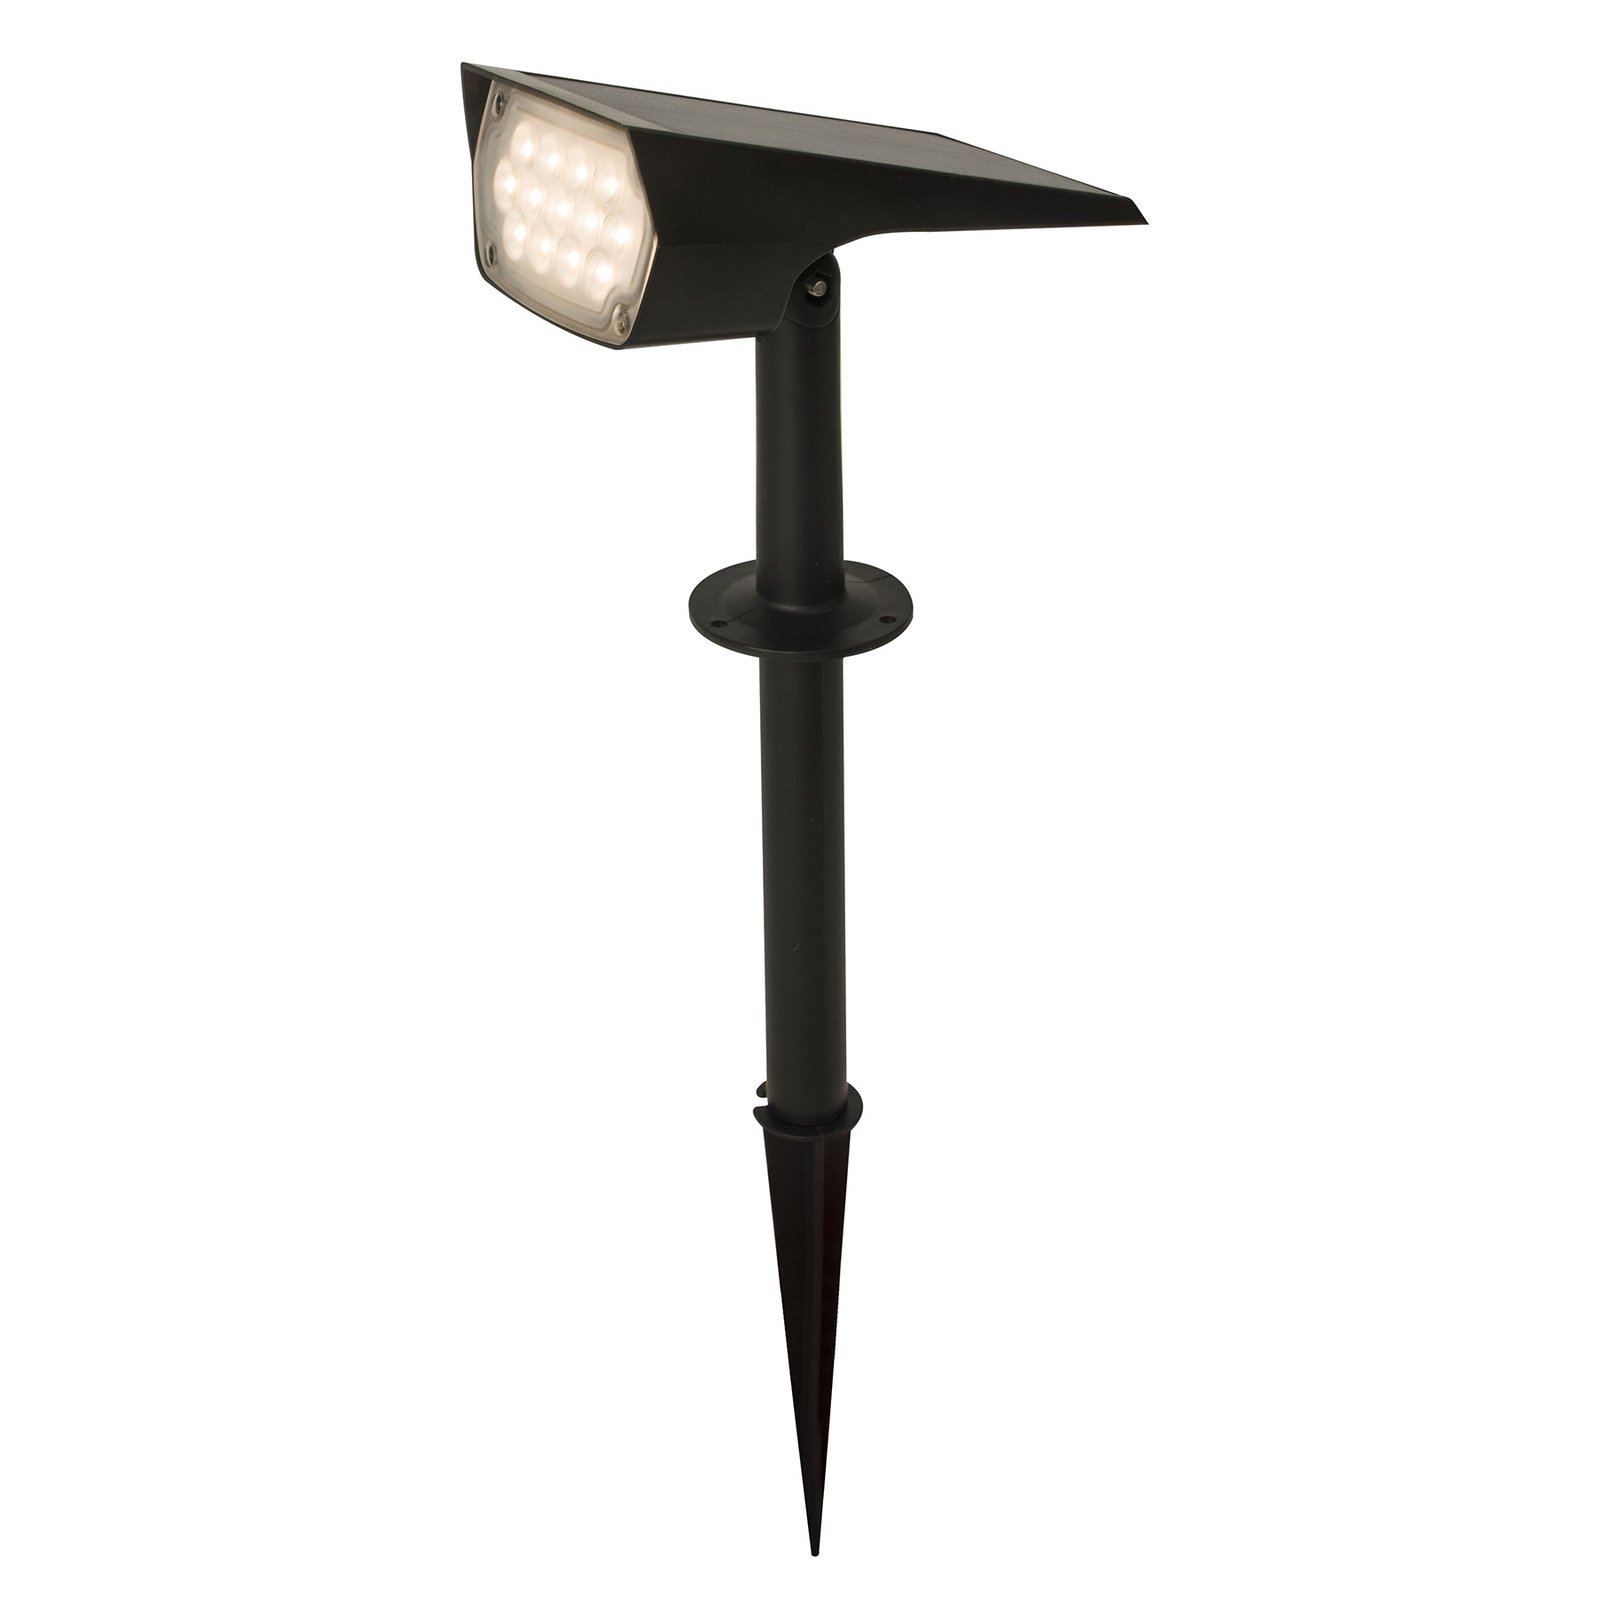 Prios Helier LED solar spotlight with ground spike